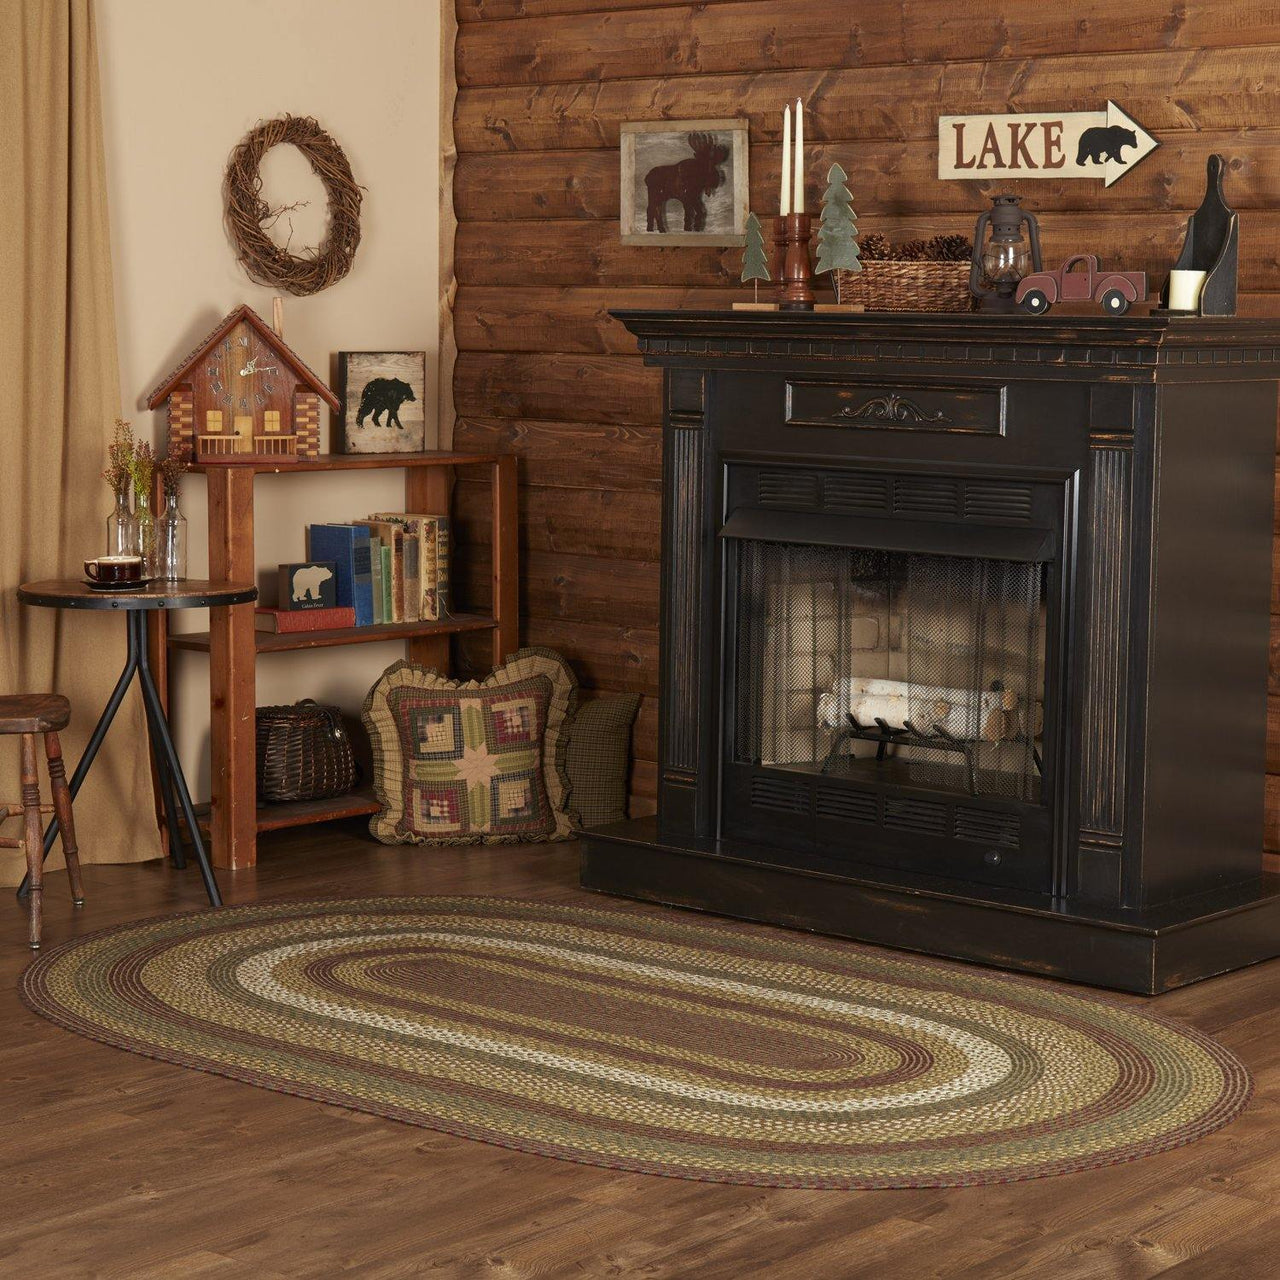 Tea Cabin Jute Braided Rug Oval 5'x8' with Rug Pad VHC Brands - The Fox Decor